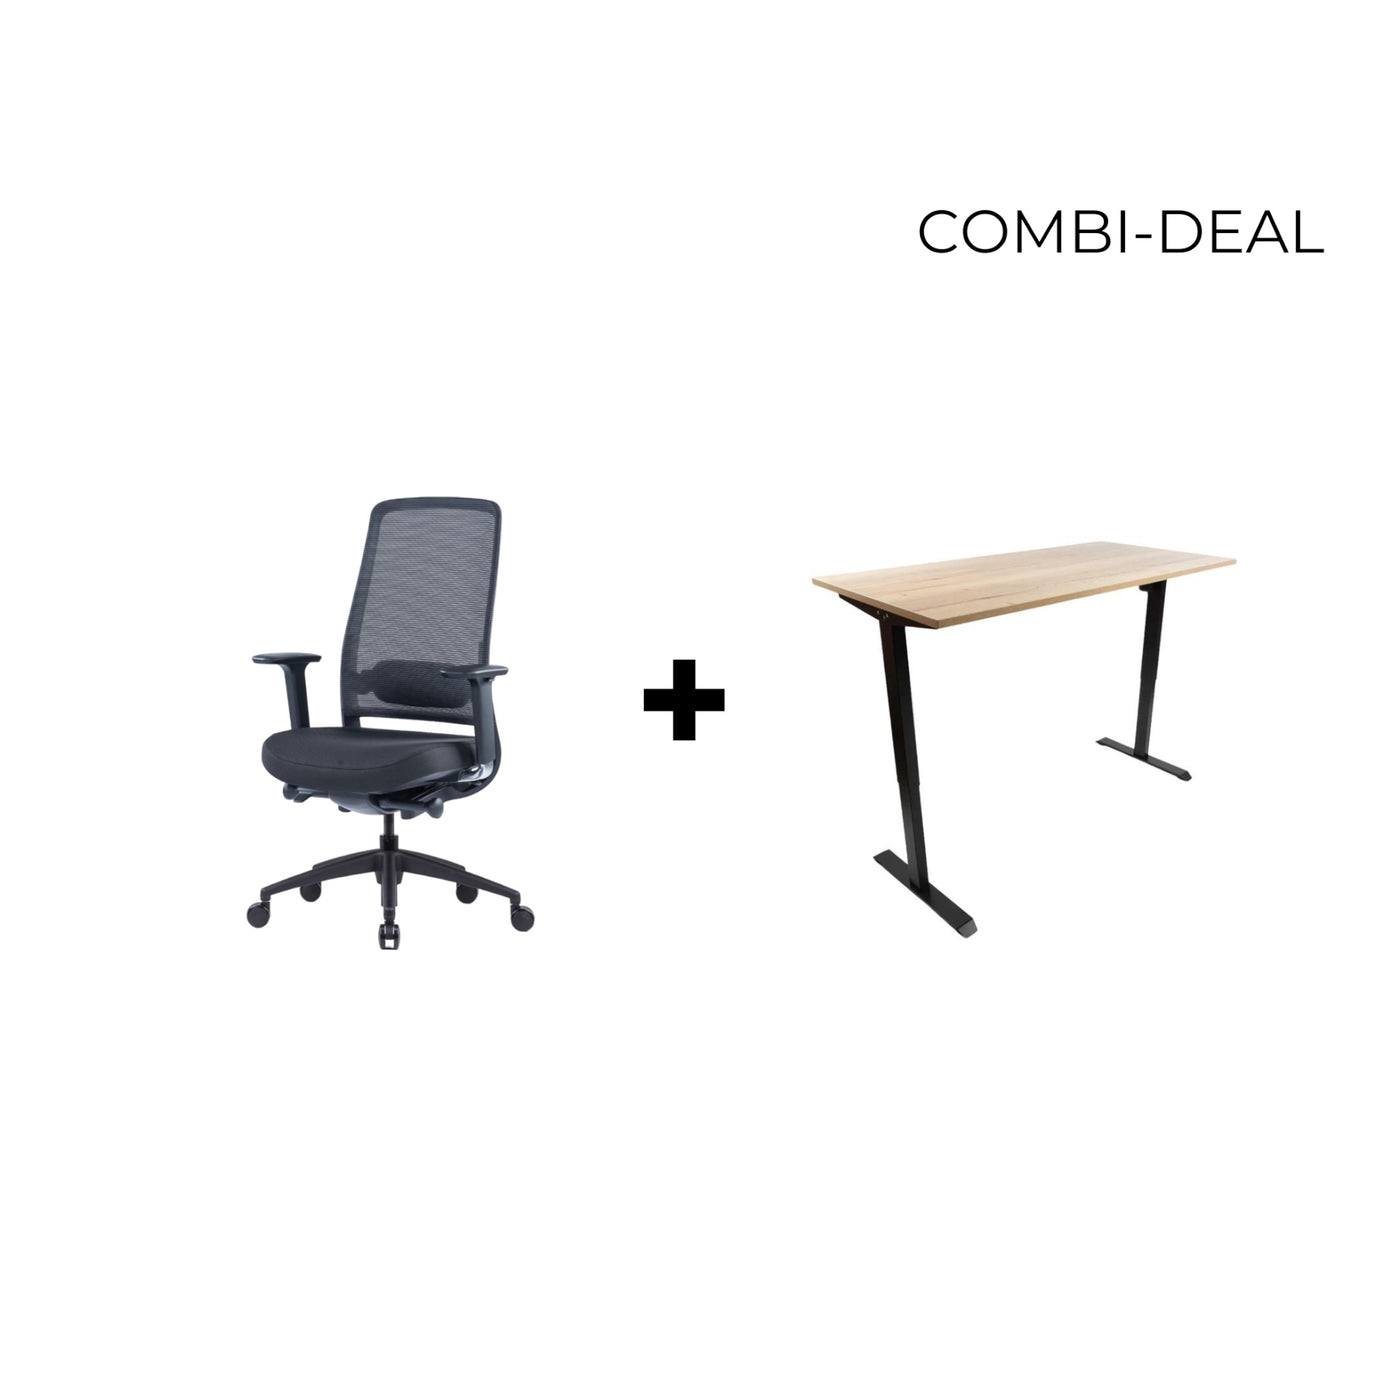 Home office - Performance Deal